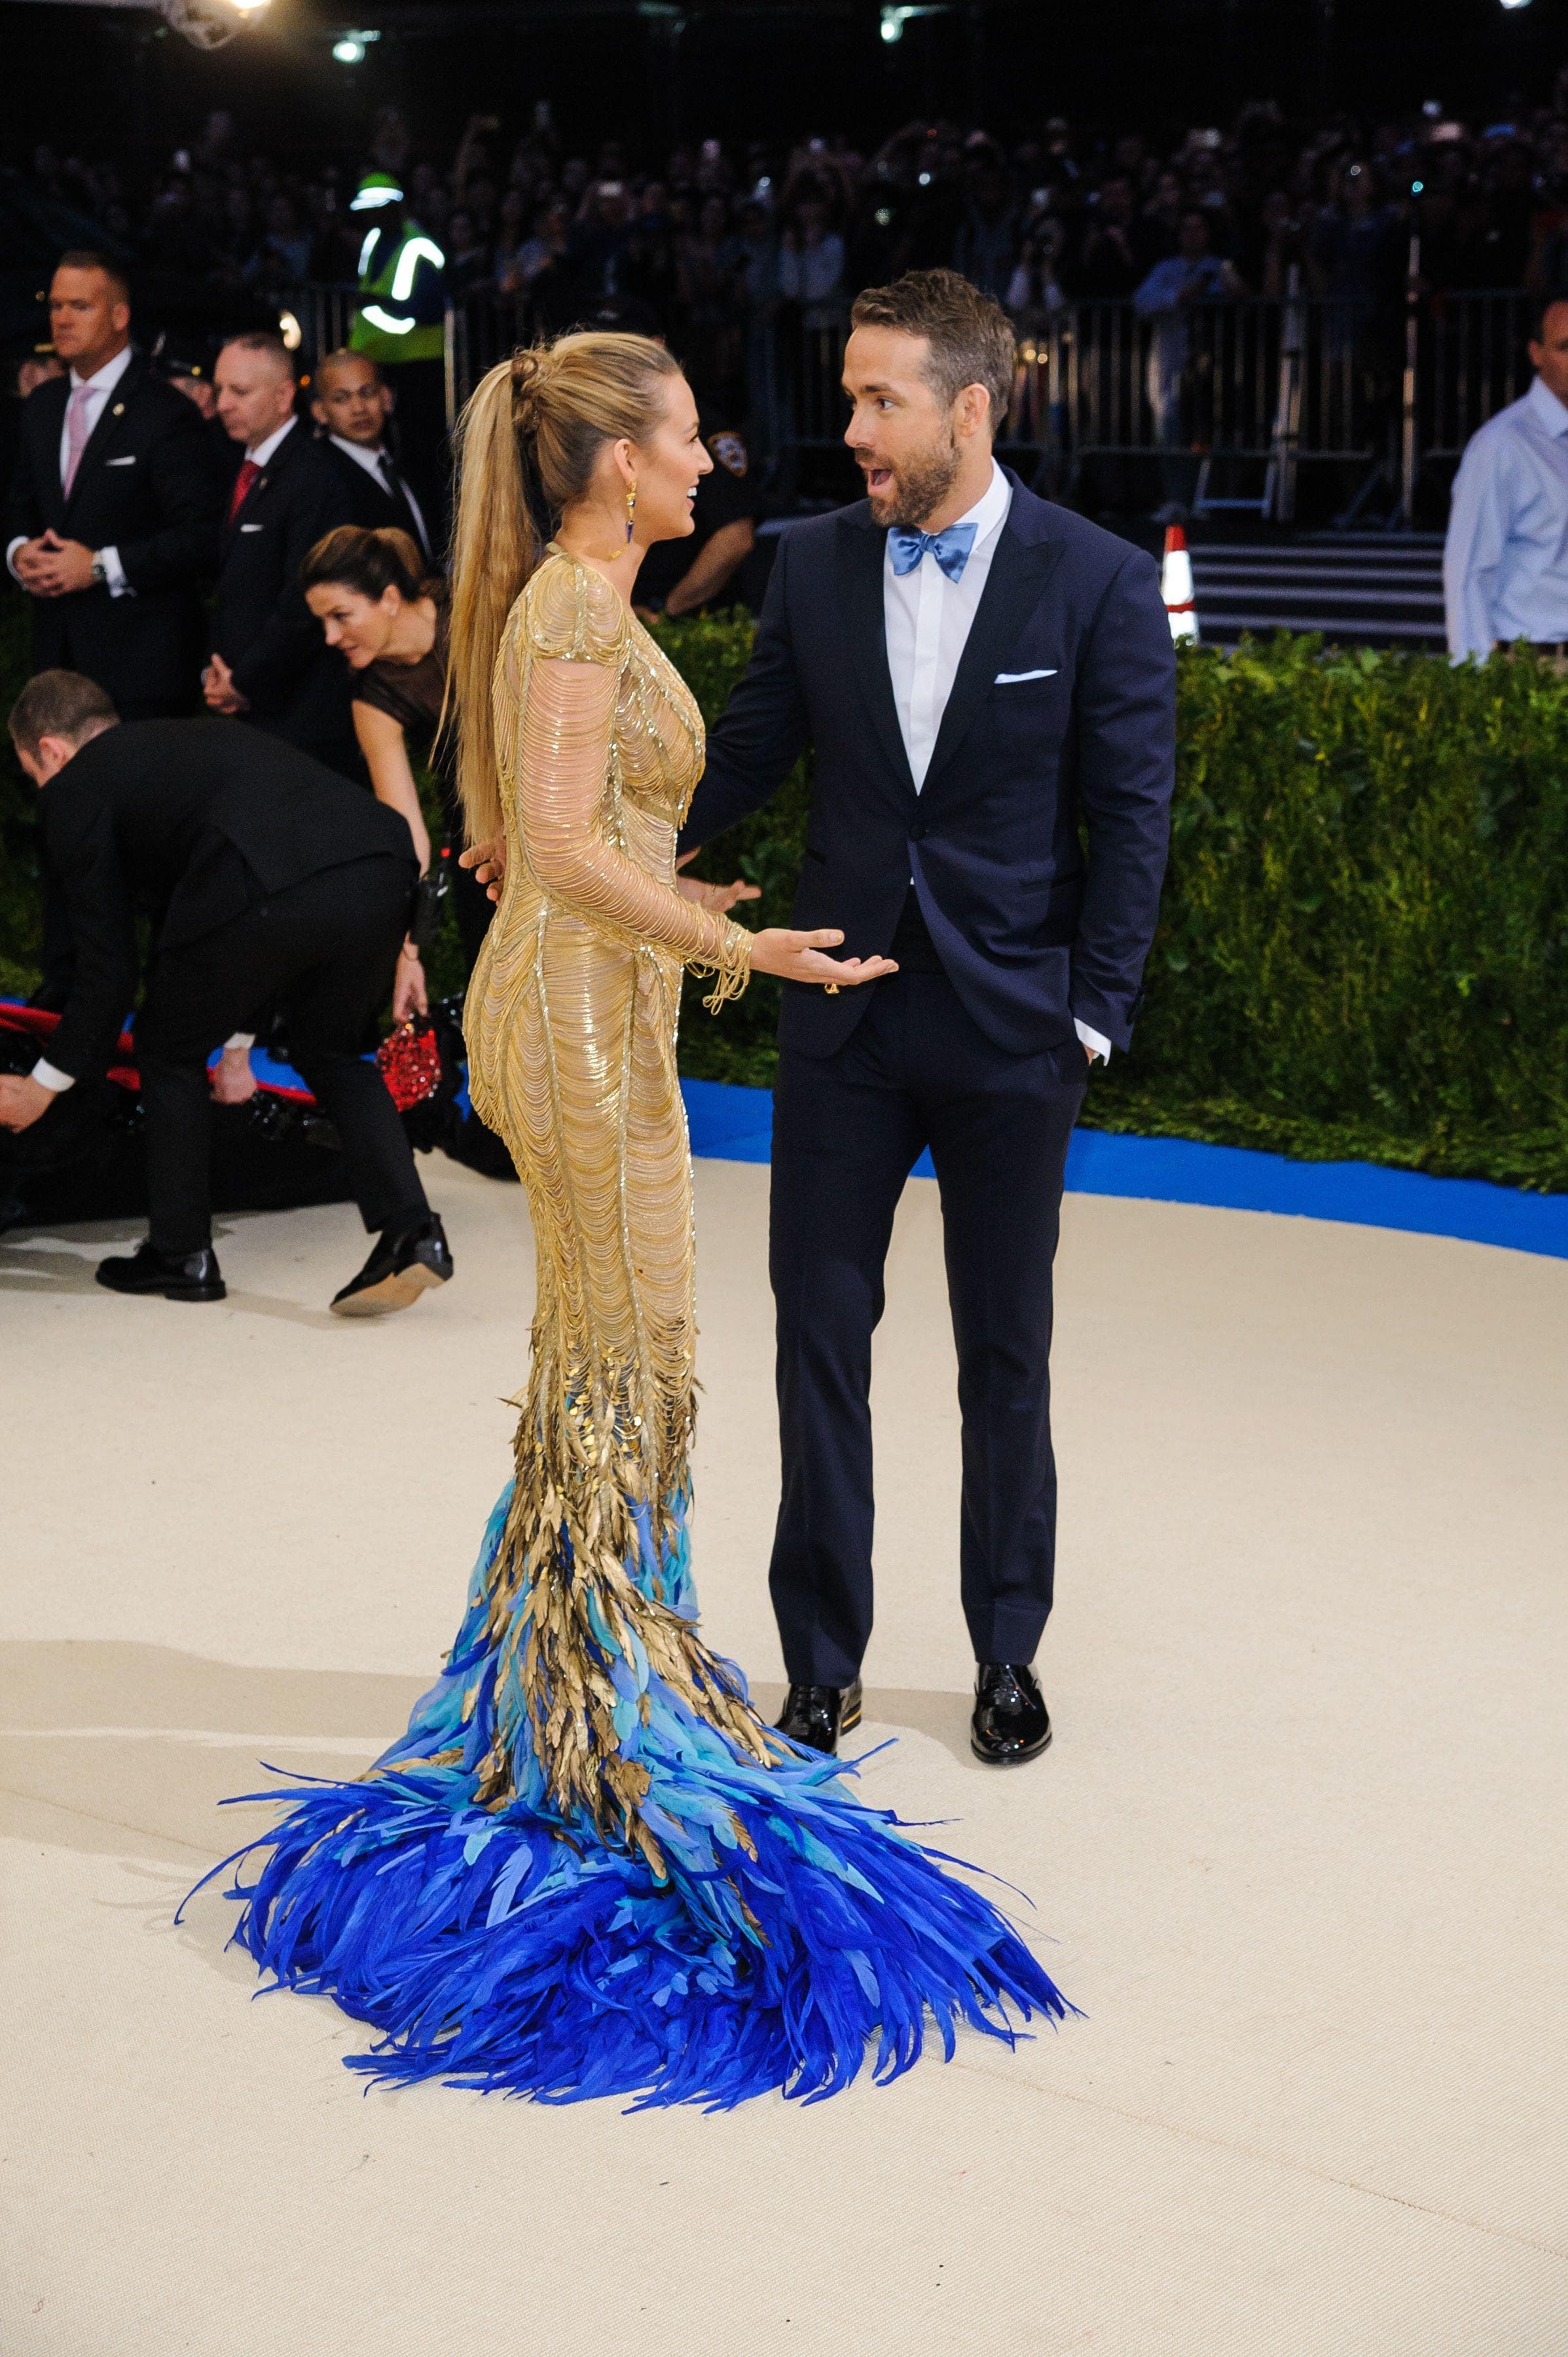 Random Facts That Prove Blake Lively And Ryan Reynolds Are Couple Goals